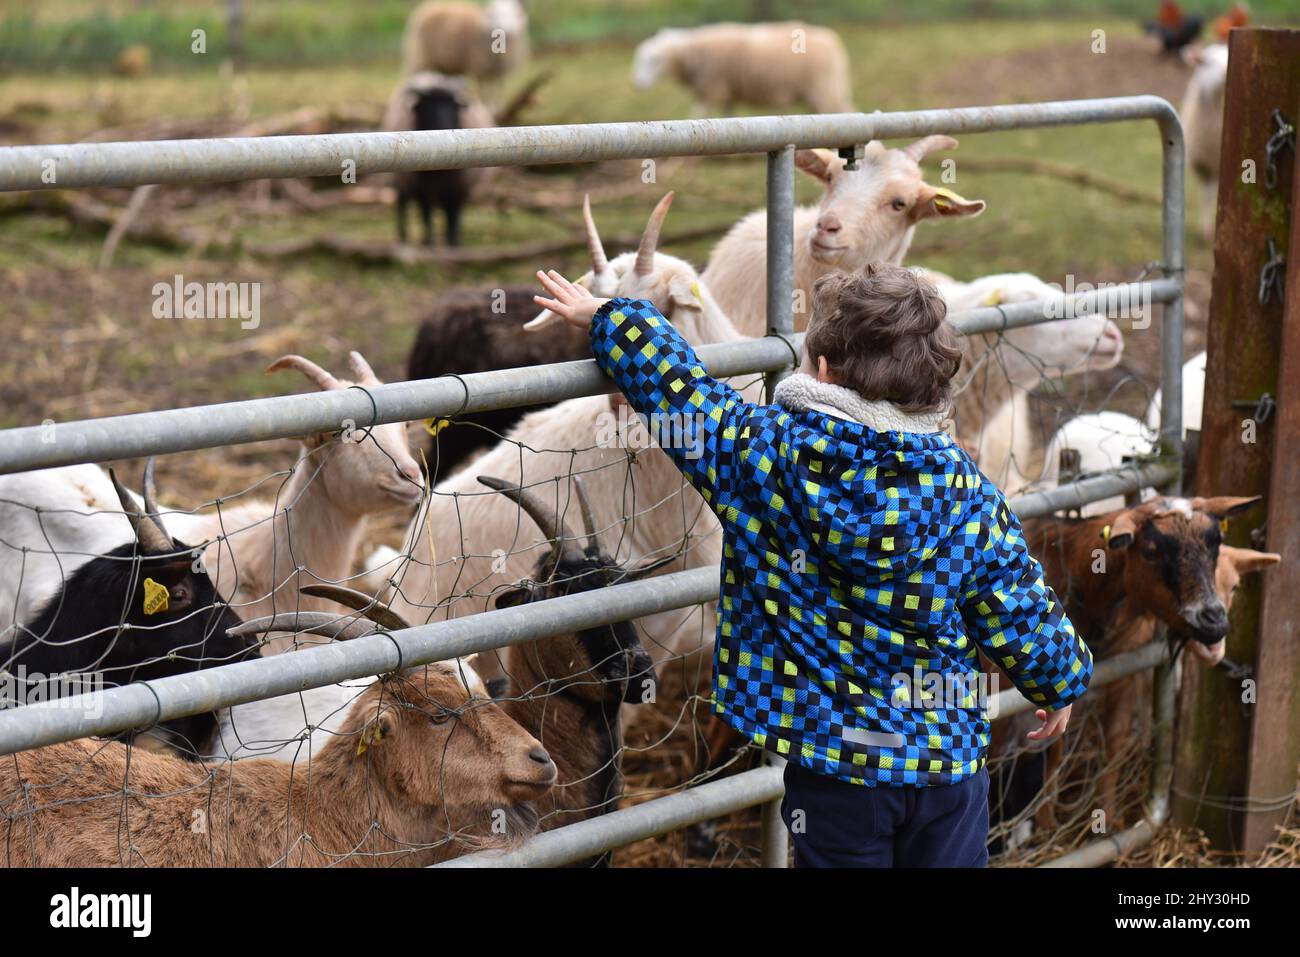 Little caucasian boy feeding goats through a wire fence in a farm. Chlid throwing grains of cereal to feed goats. Stock Photo